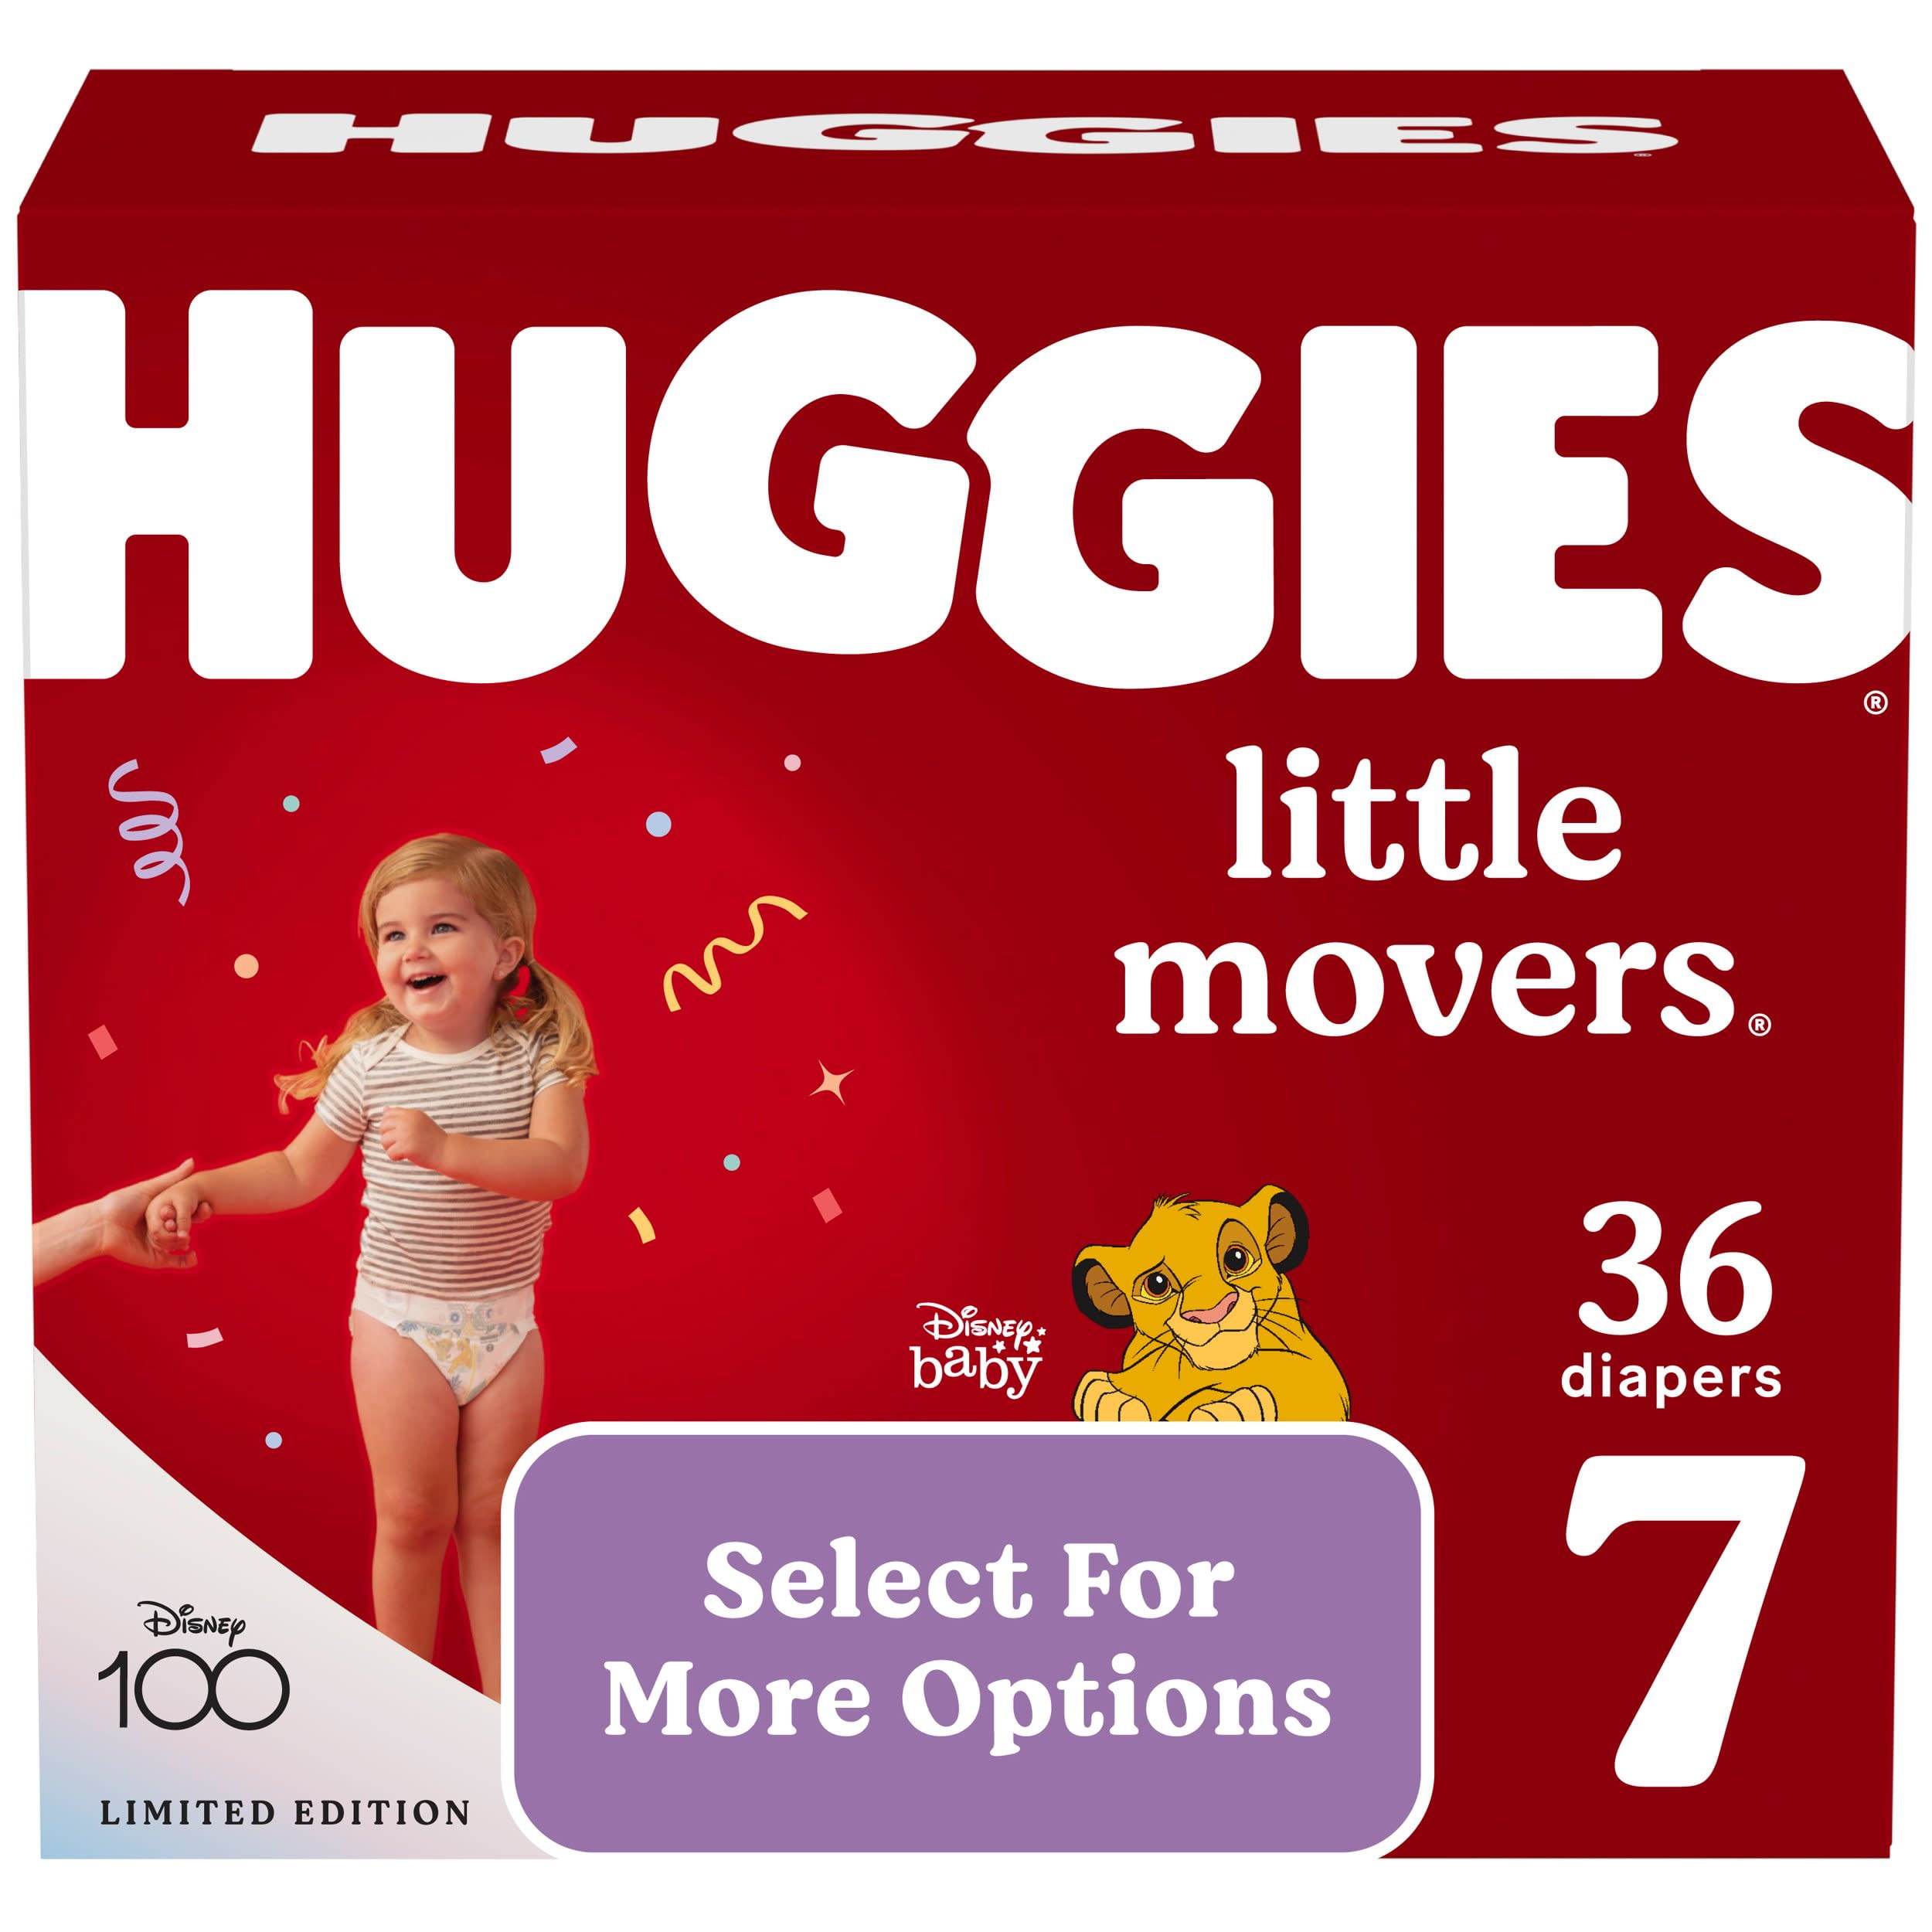 huggies+little+movers+size+6-+38+Diapers for sale online